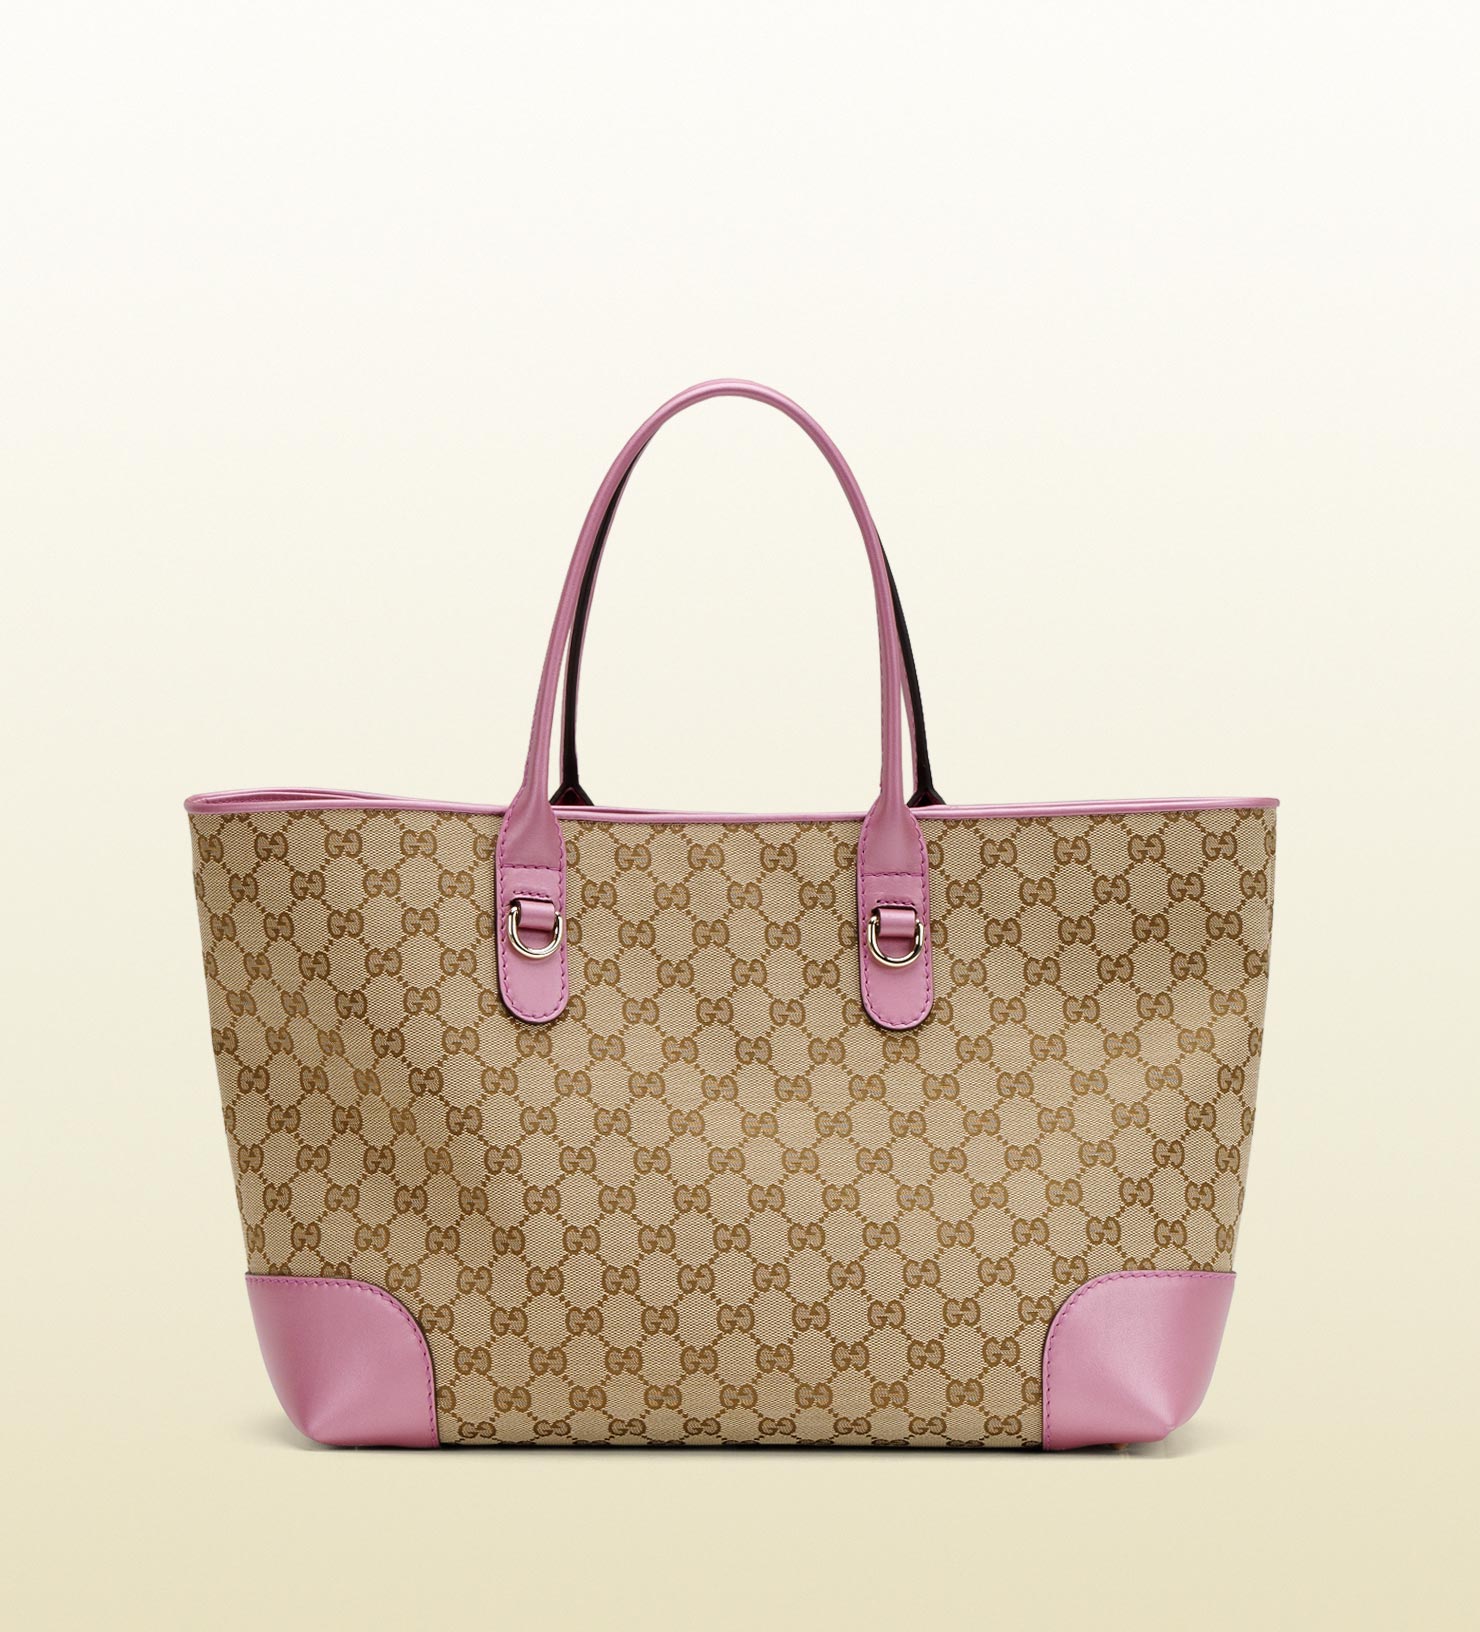 Gucci GG Mini Bag with Charm Beige/Ebony in GG Supreme Canvas with